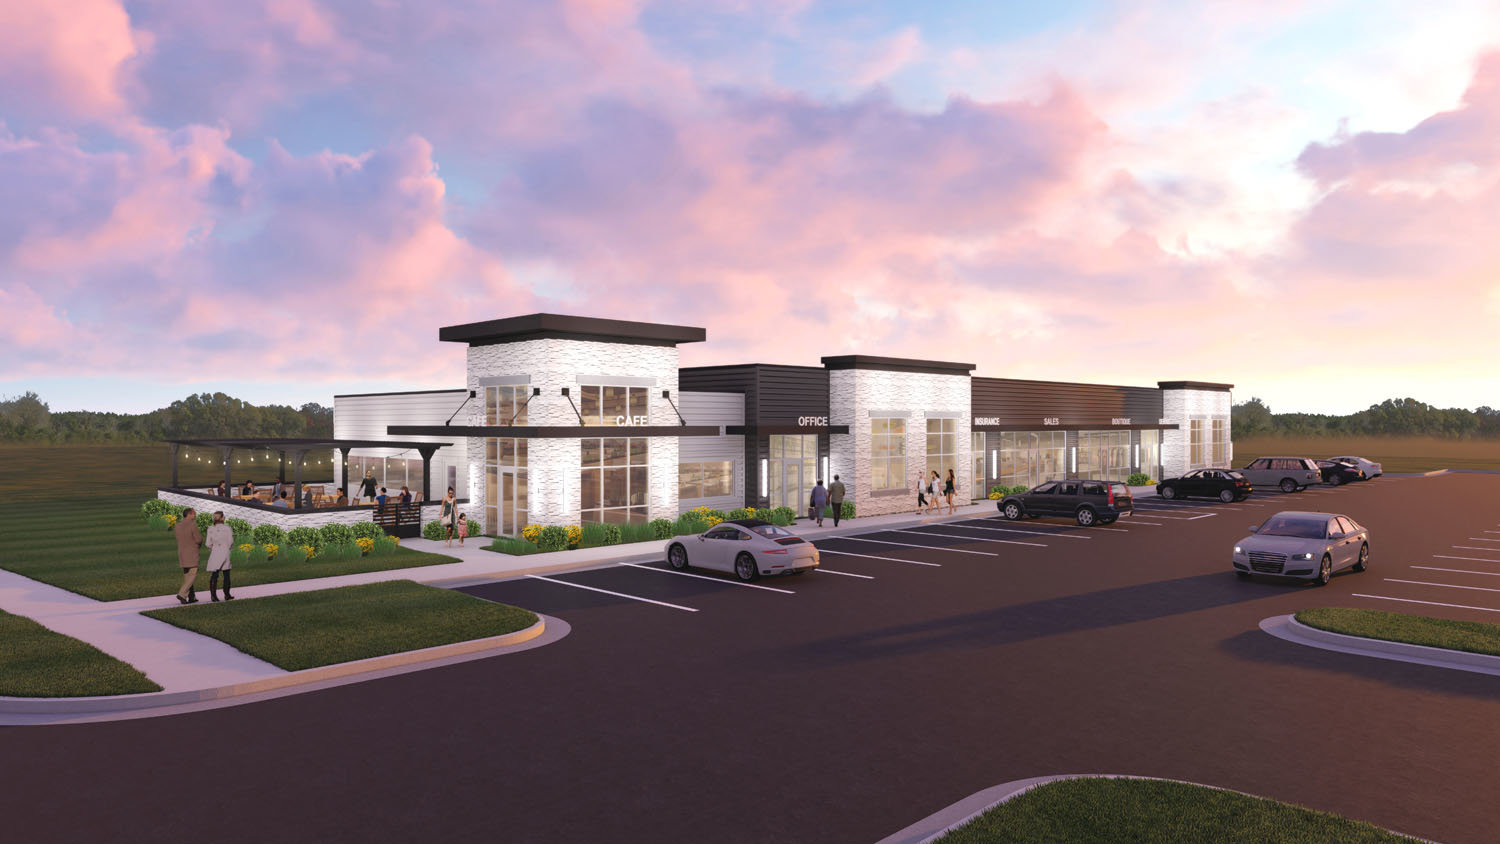 Plans are in the works to create a mixed-use business center with a focus on ancillary real estate services next to the future Keller Williams local headquarters.